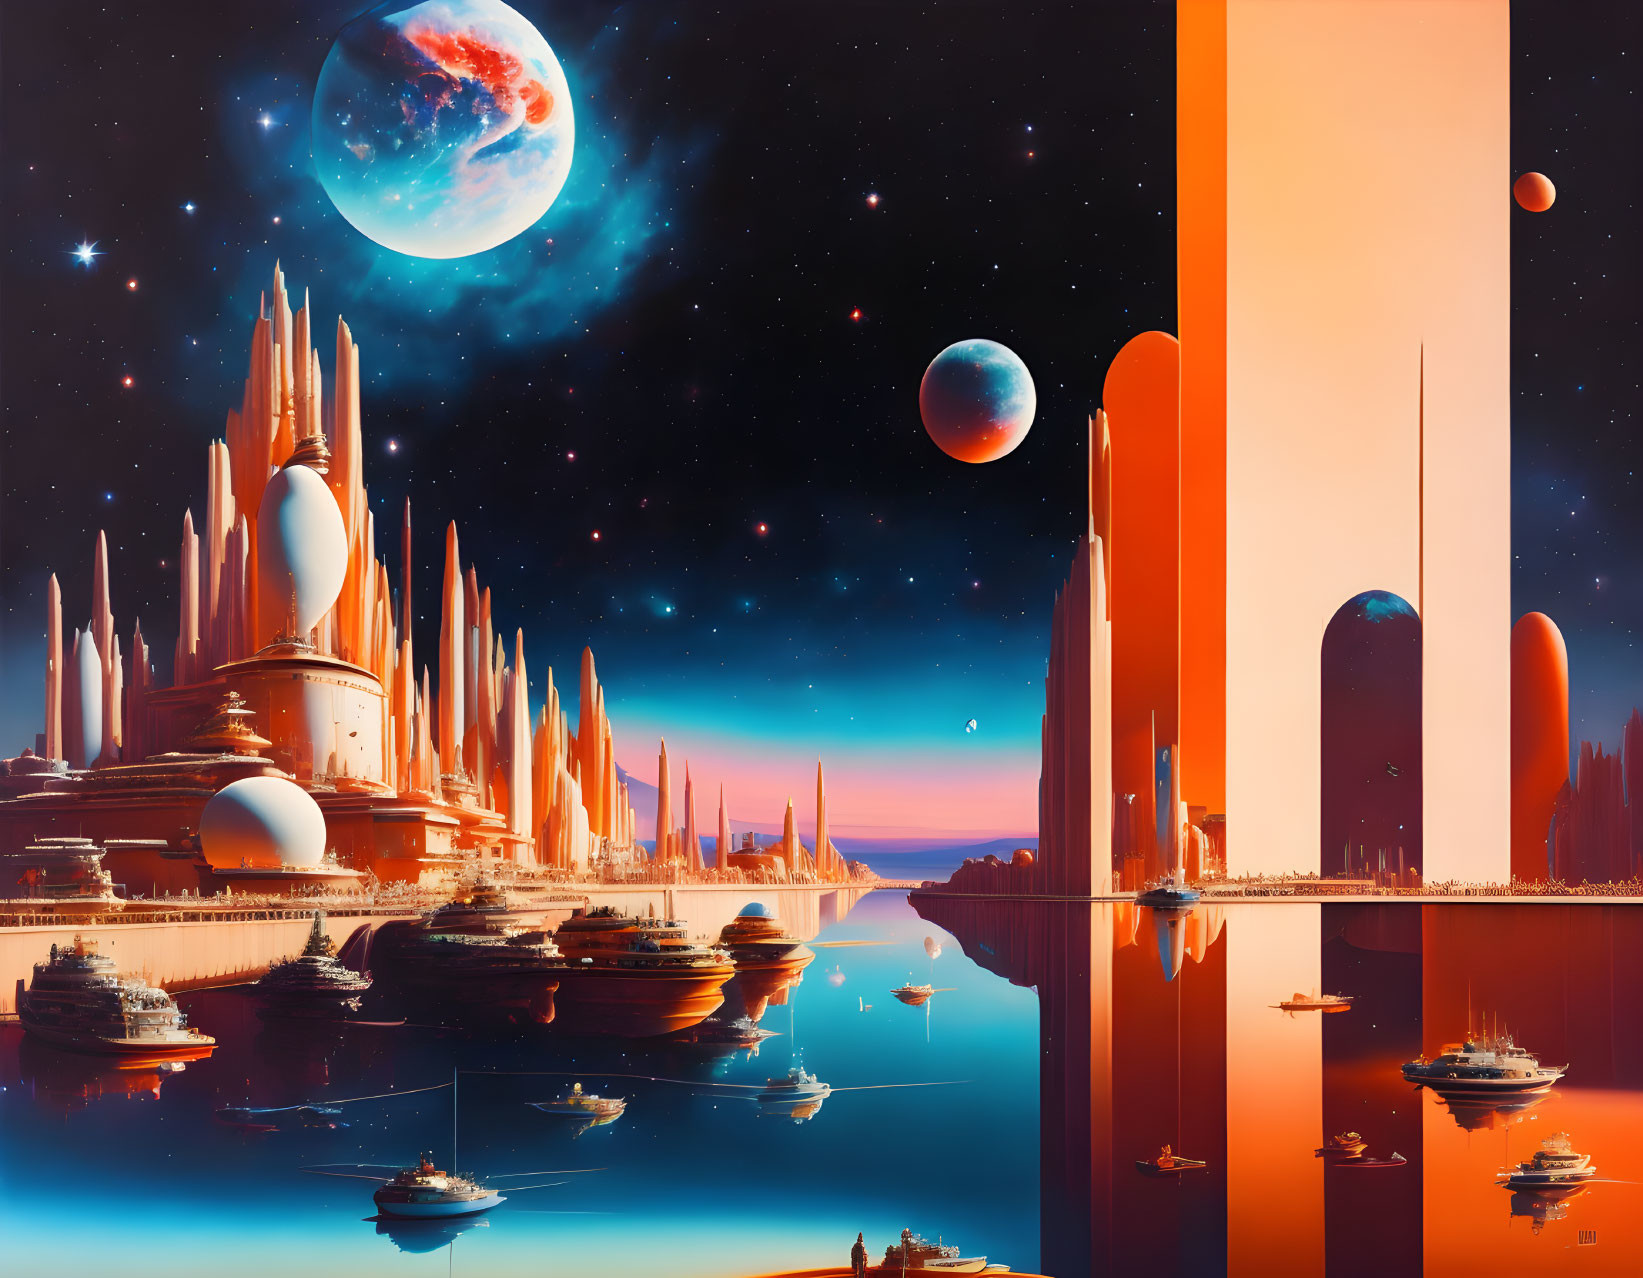 Futuristic cityscape with tall buildings, spaceships, planets, and sunset sky.